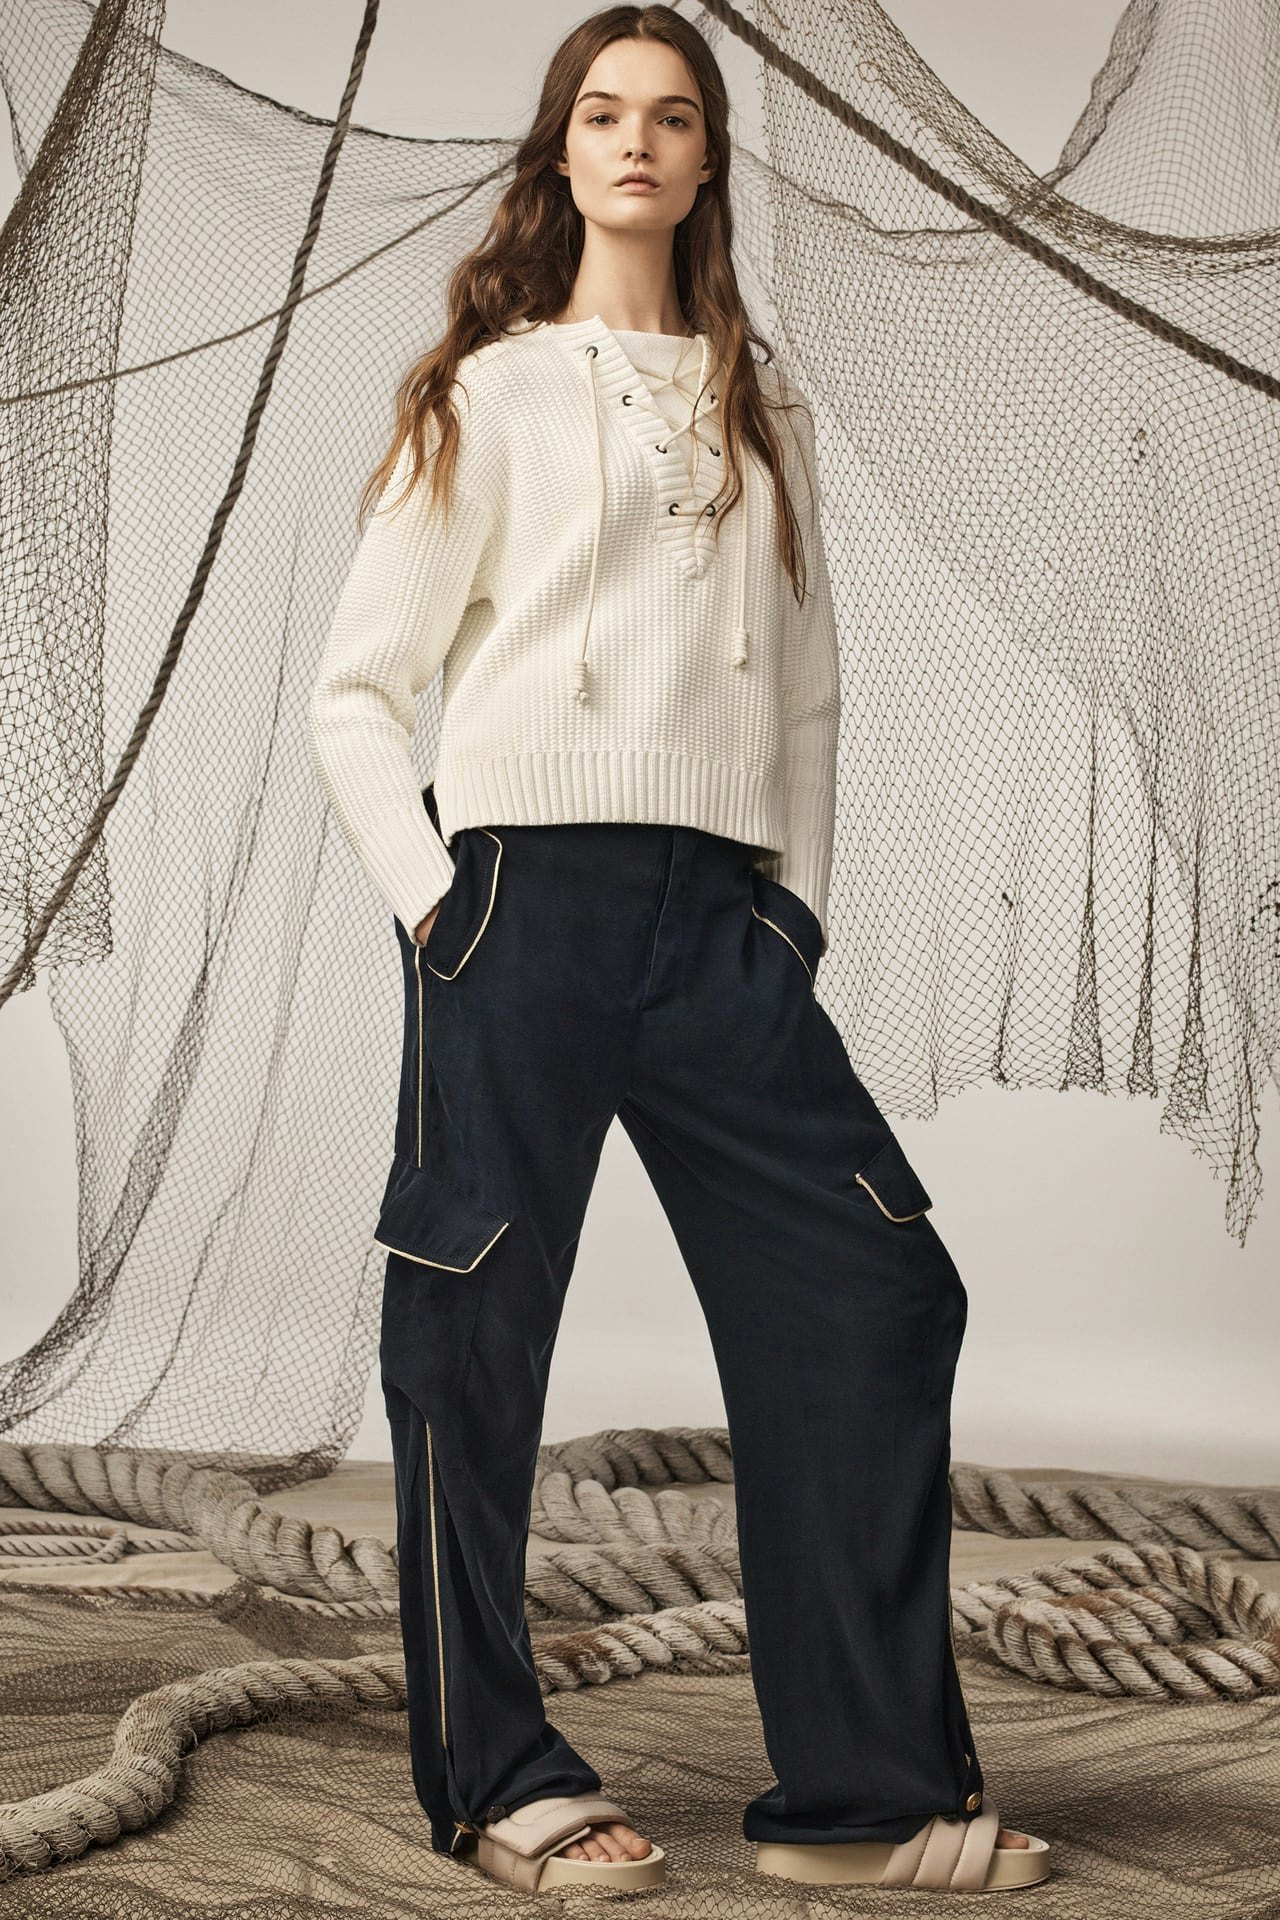 Zara's Srpls Chptr 4 Collection Is Filled With Minimalist Utilitarian ...